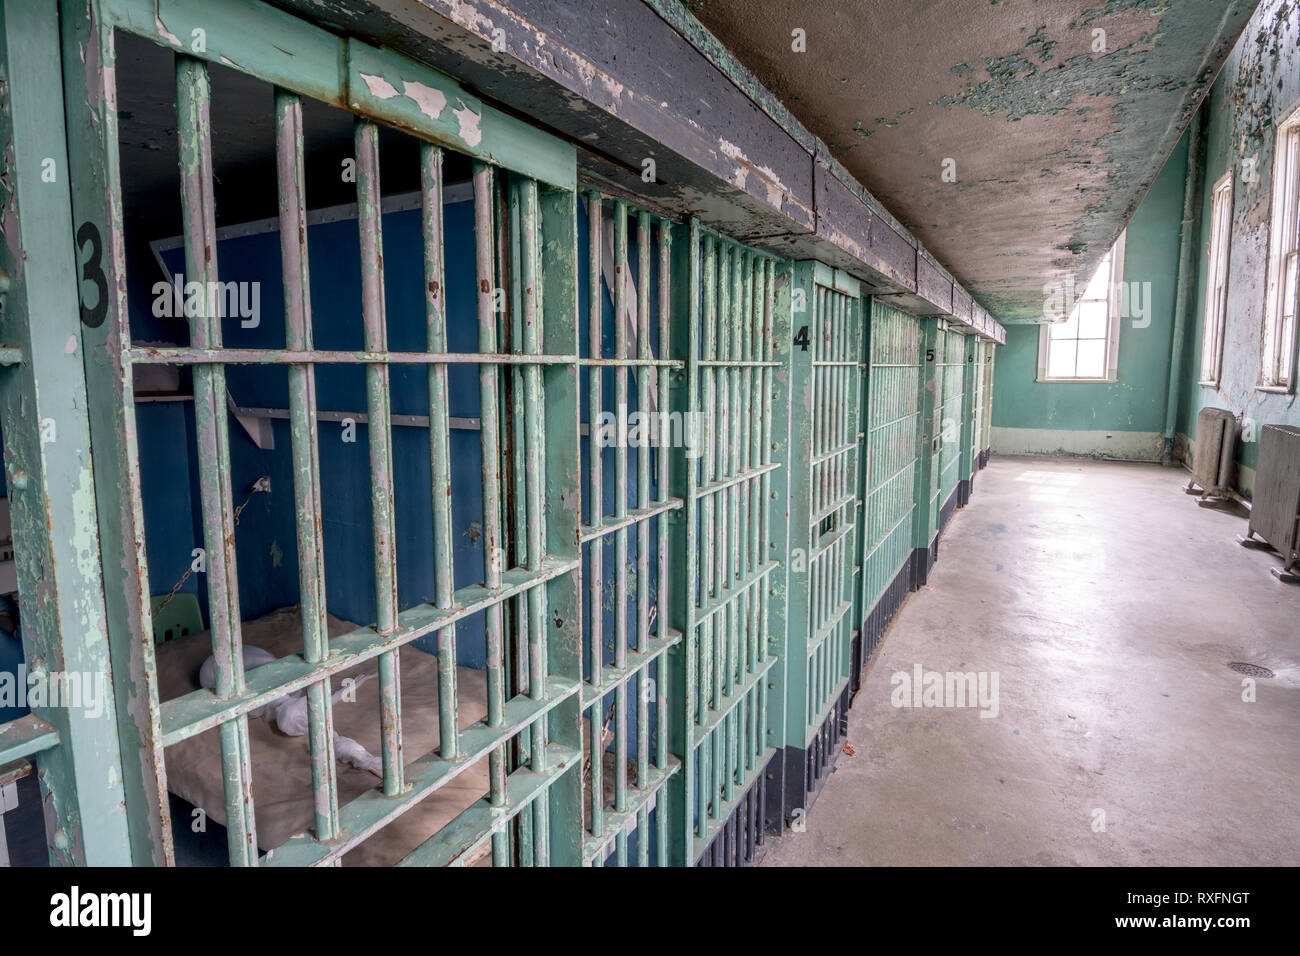 Prison cell block of jail doors with steel bars Stock Photo